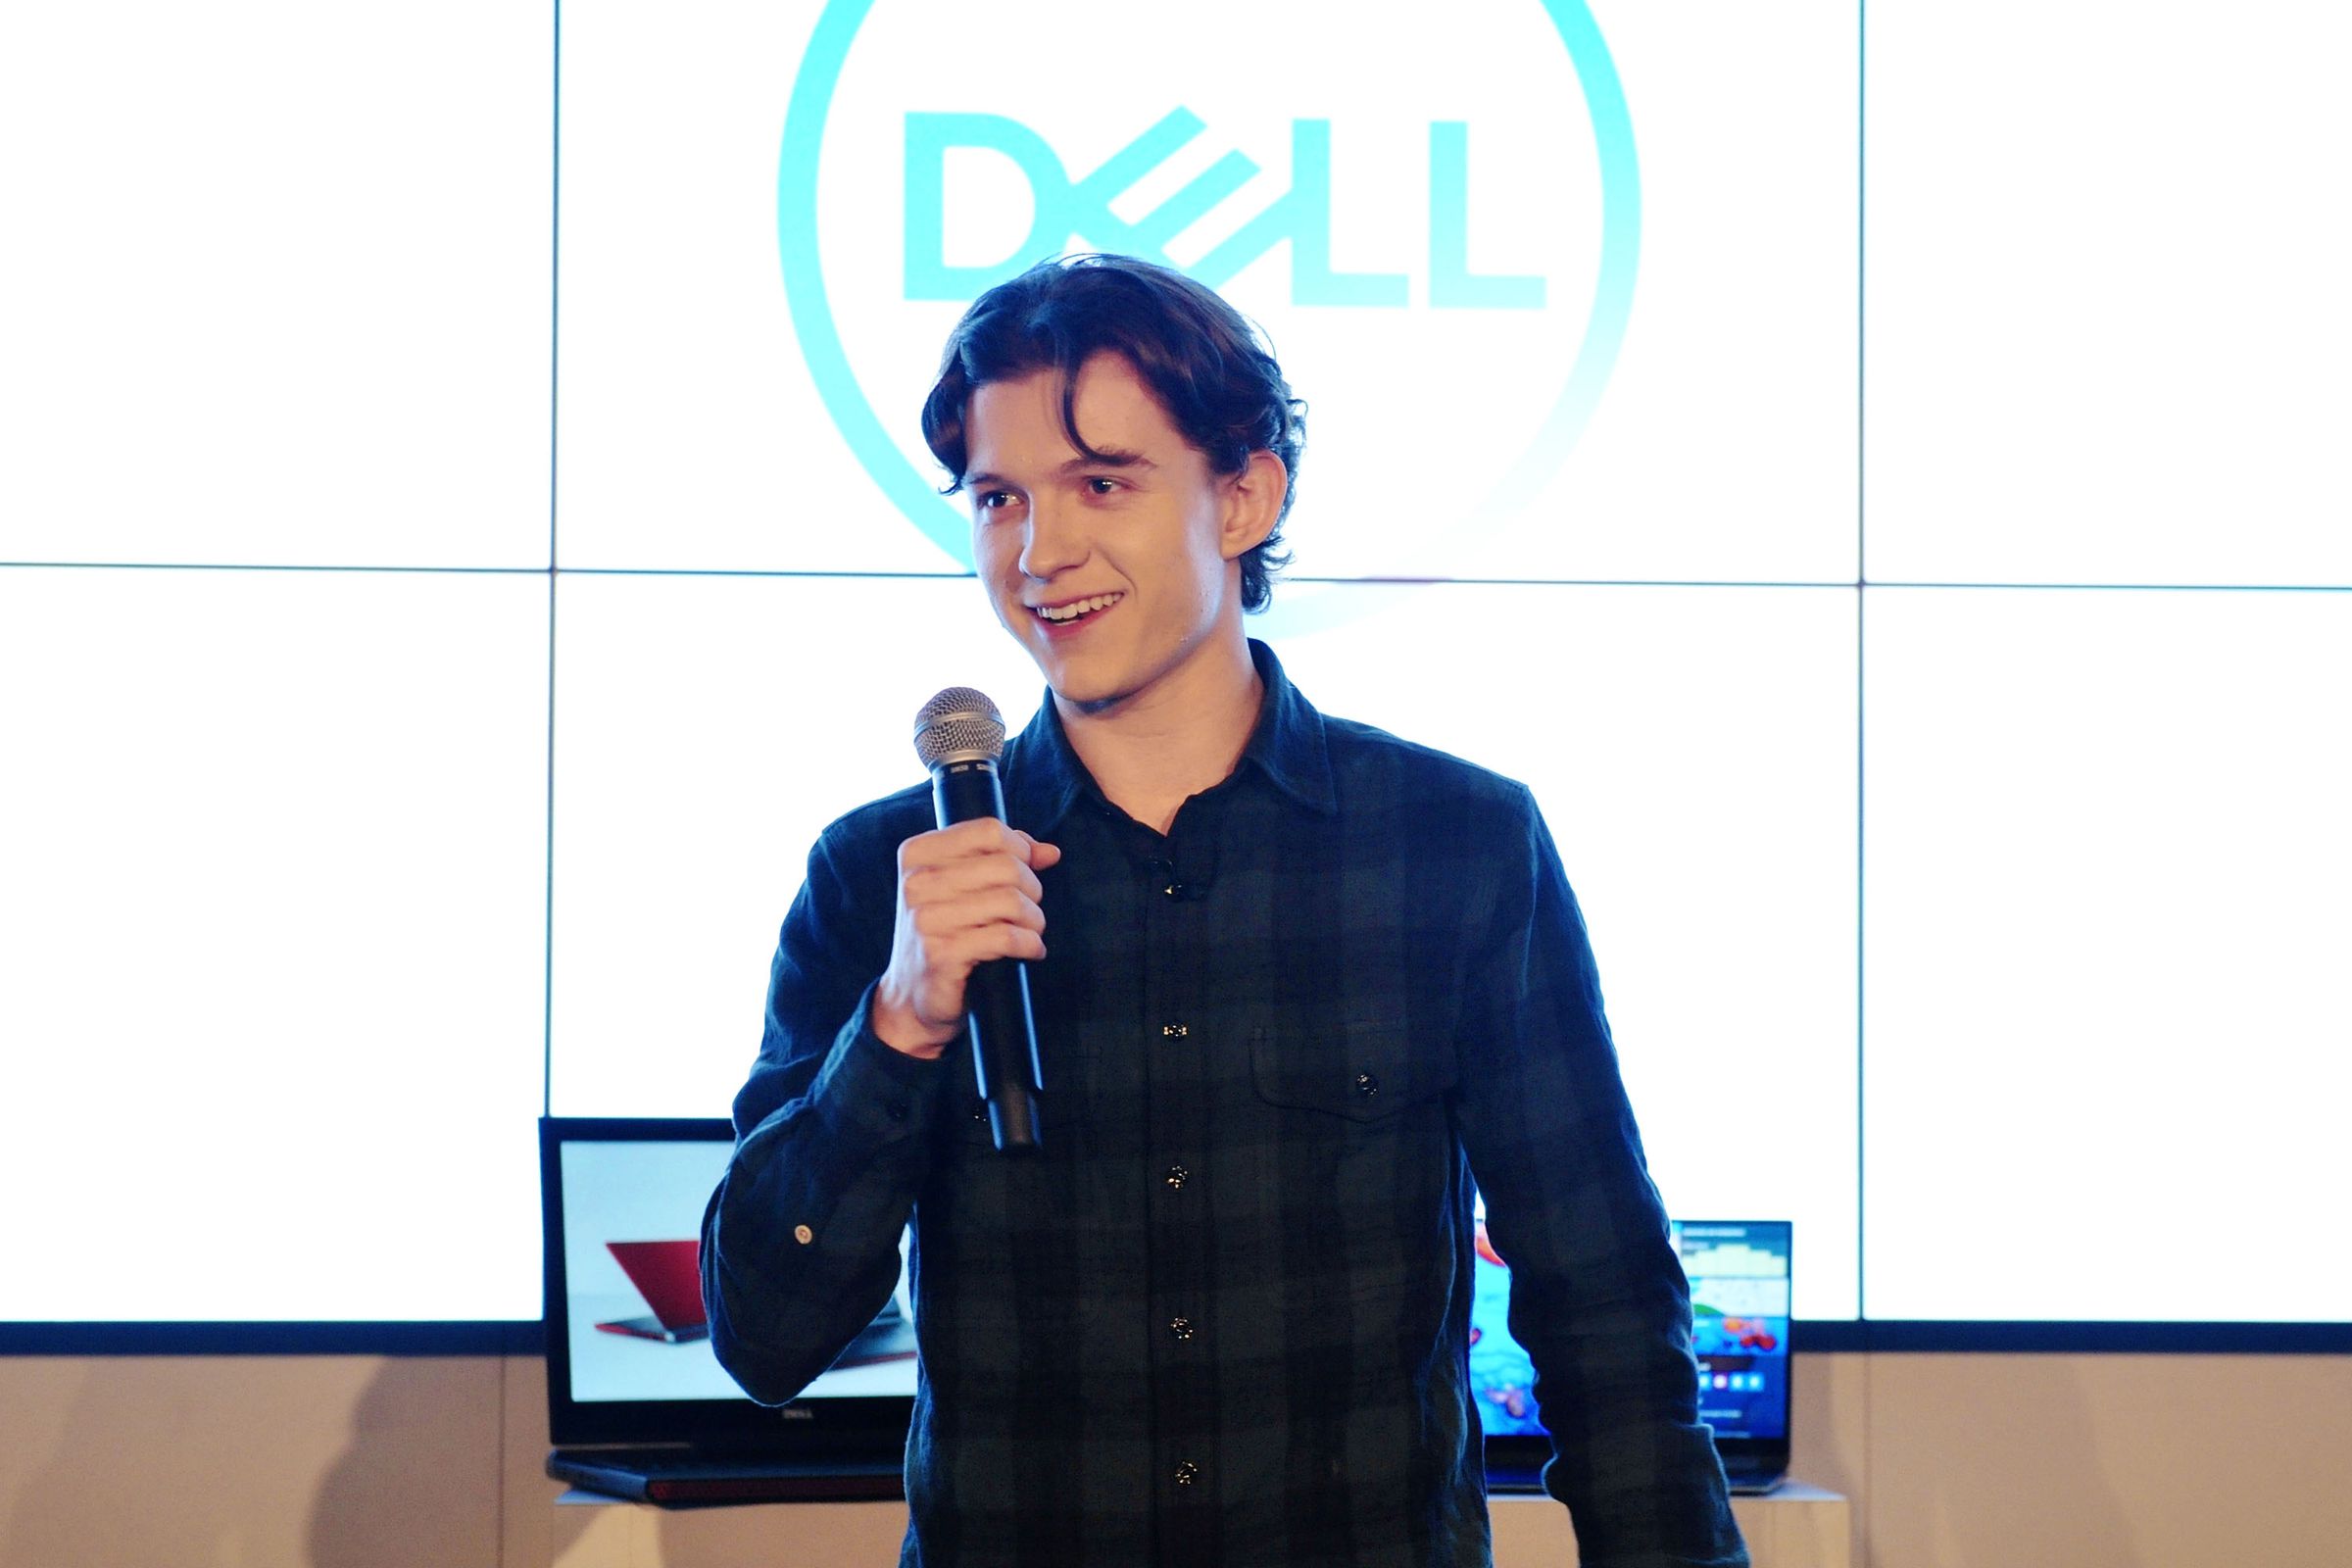 Tom Holland joins #DellExperience at CES 2017